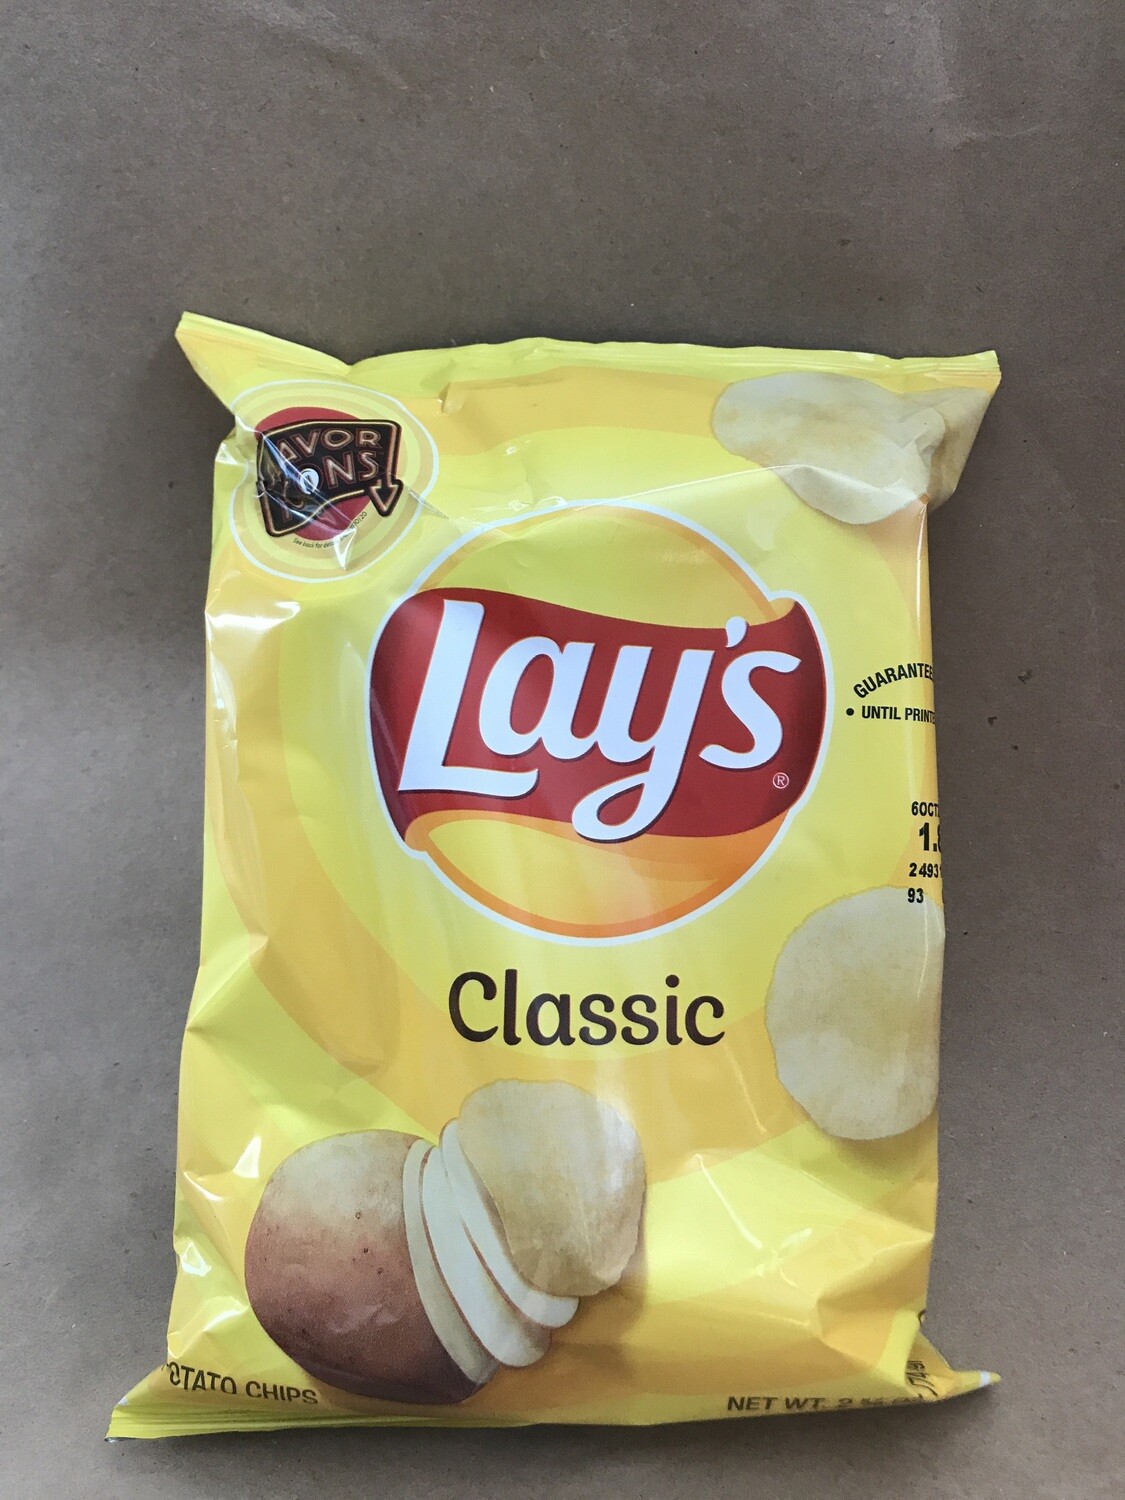 Chips / Small Bag / Lay's Classic, 3 oz